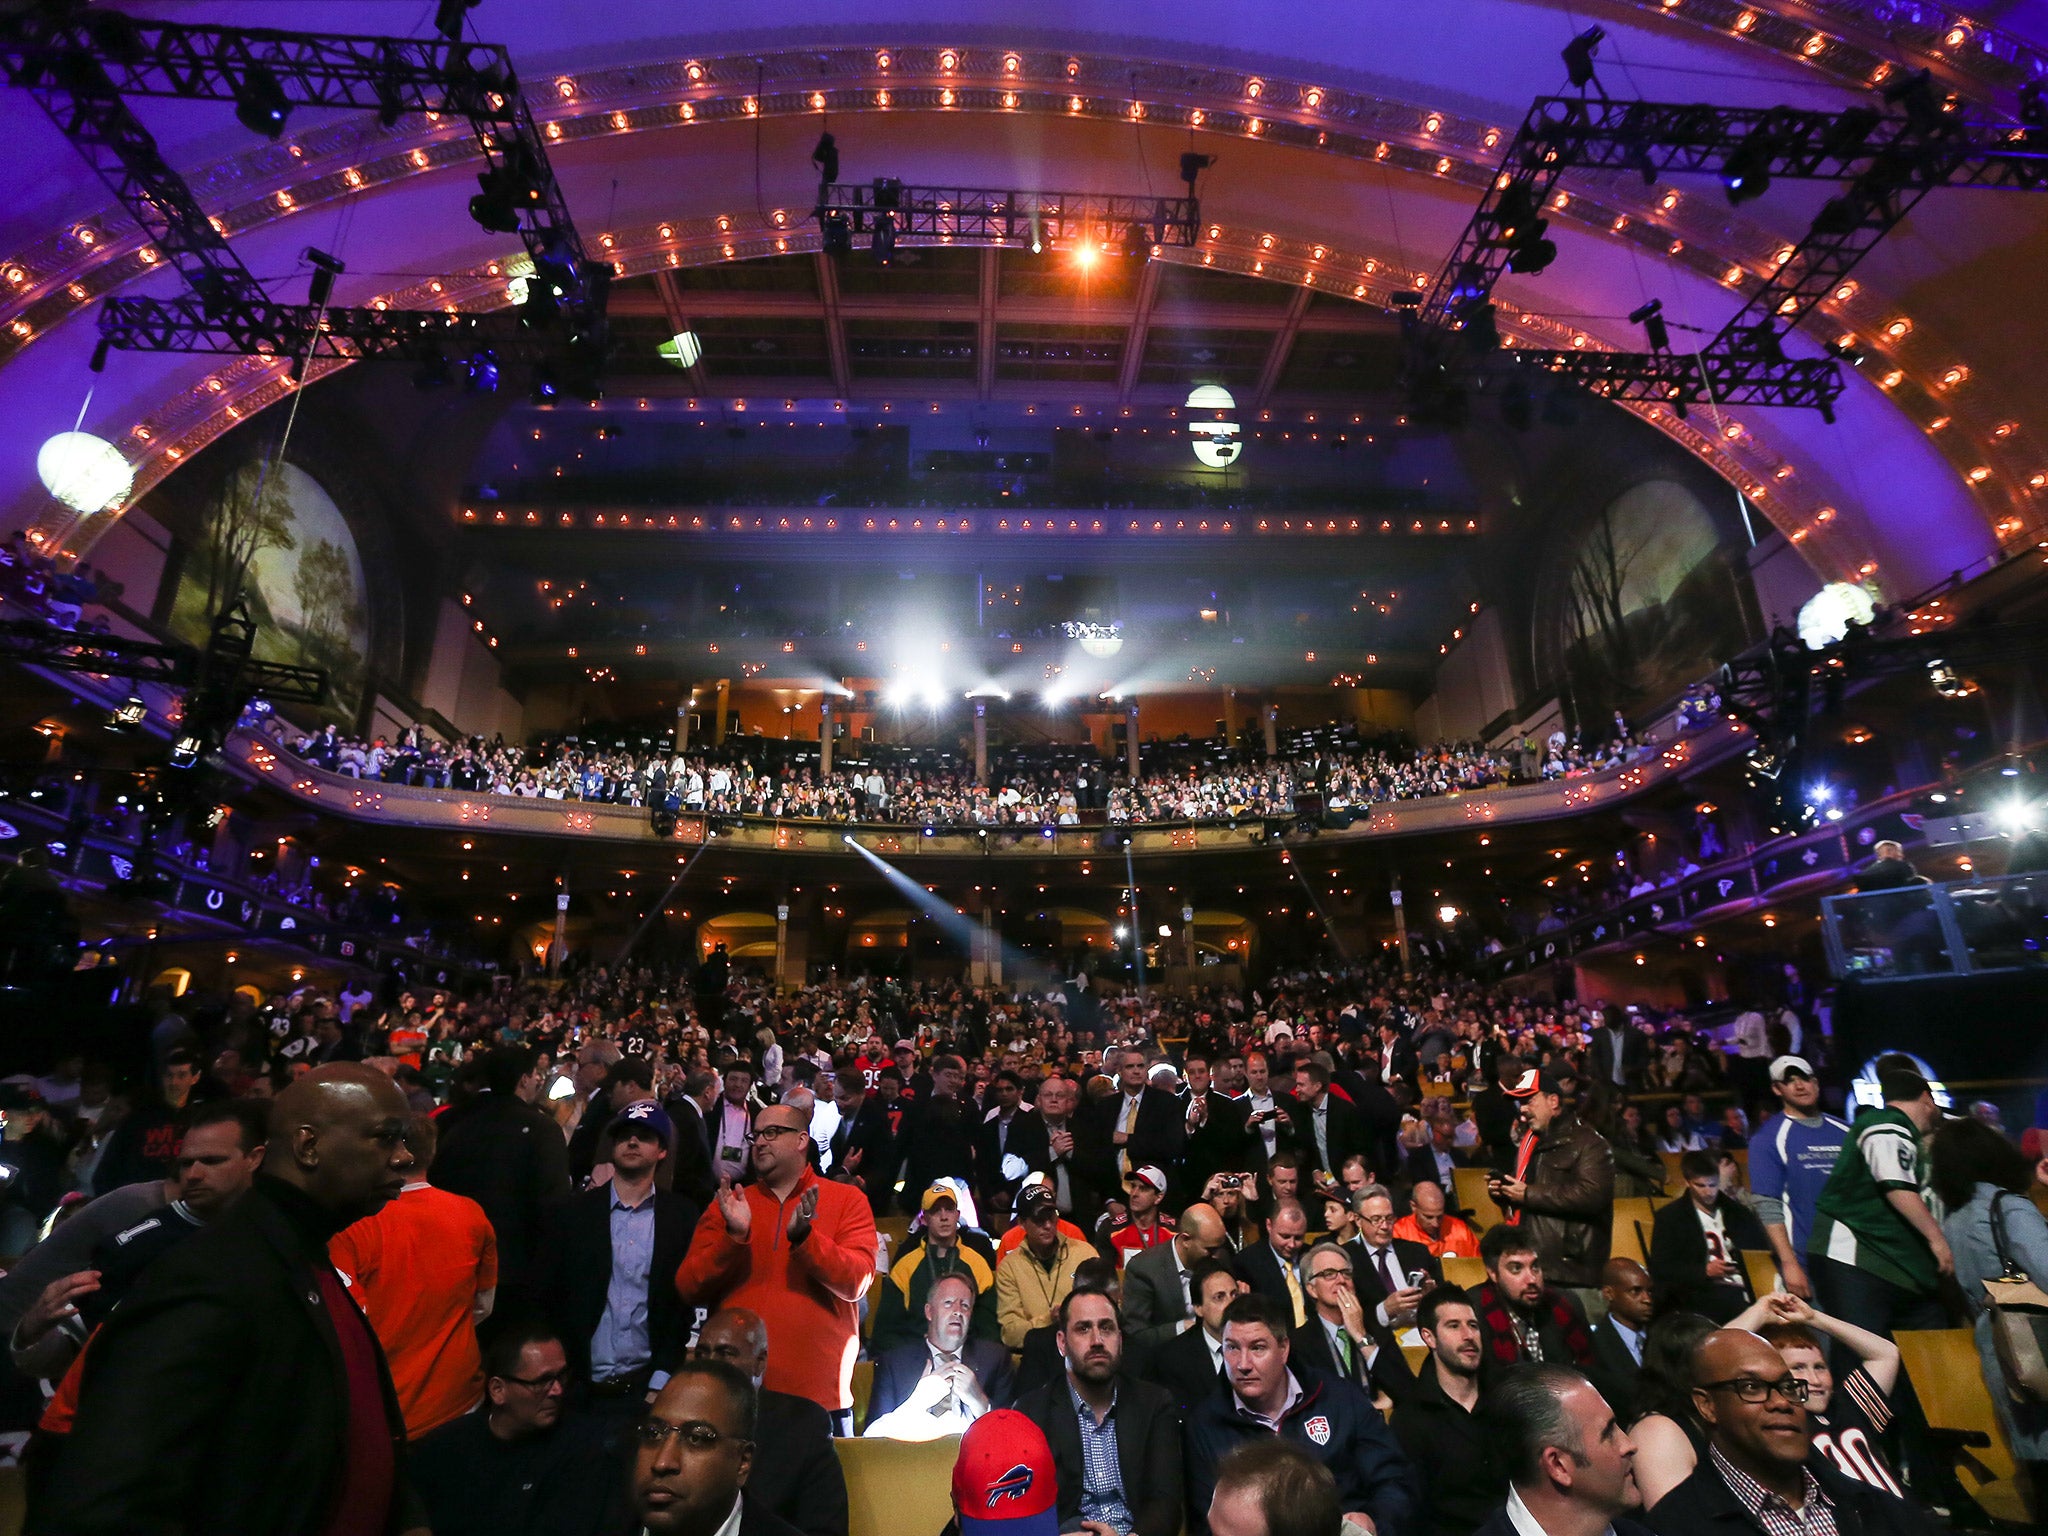 The NFL Draft takes place at the Auditorium Theatre in Chicago for the second consecutive year